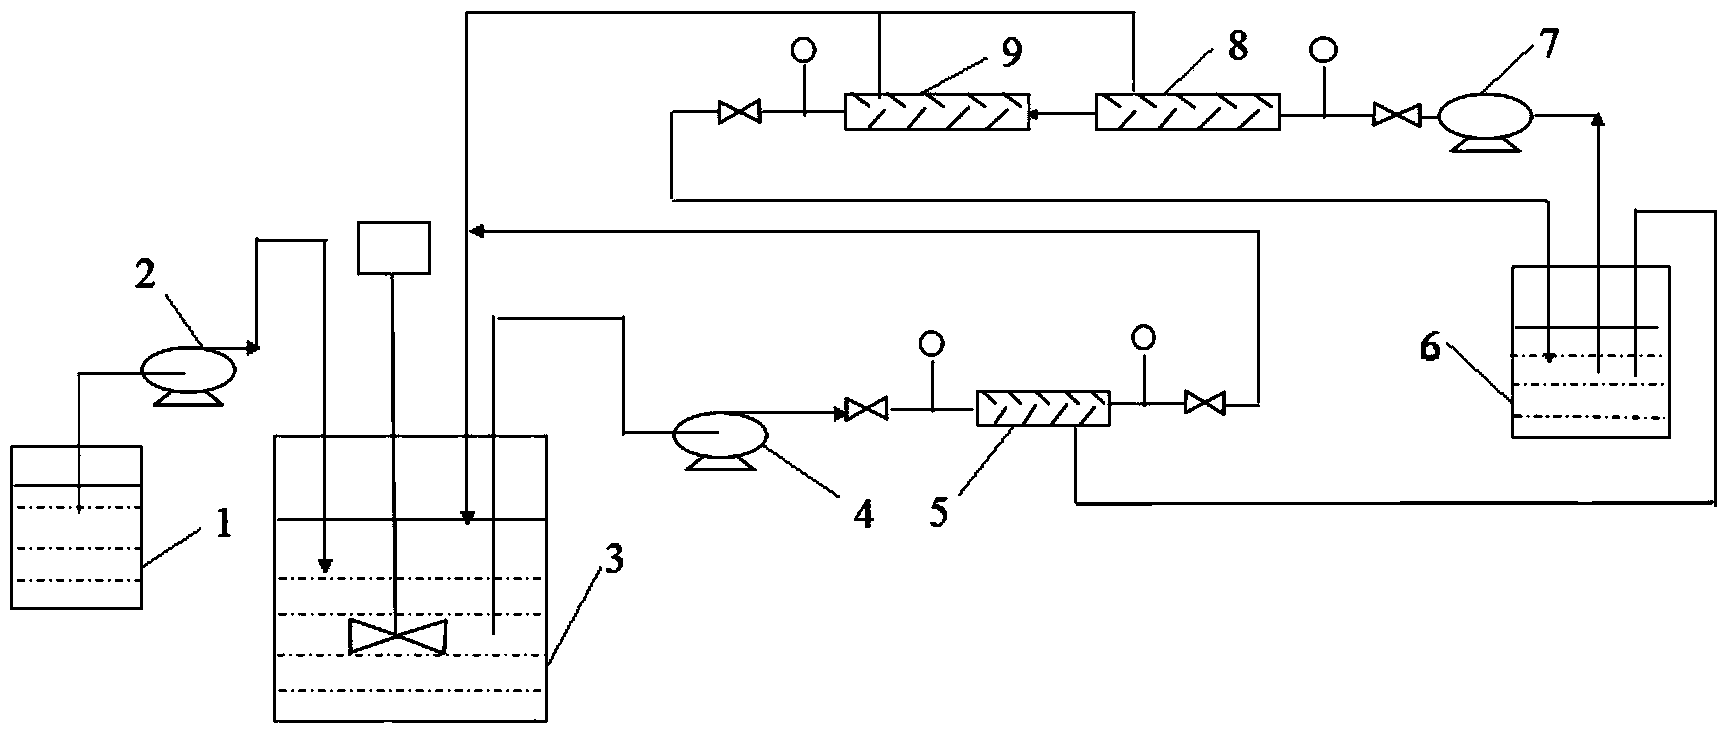 Method for producing epothilone B based on coupling of microbial fermentation and membrane separation techniques